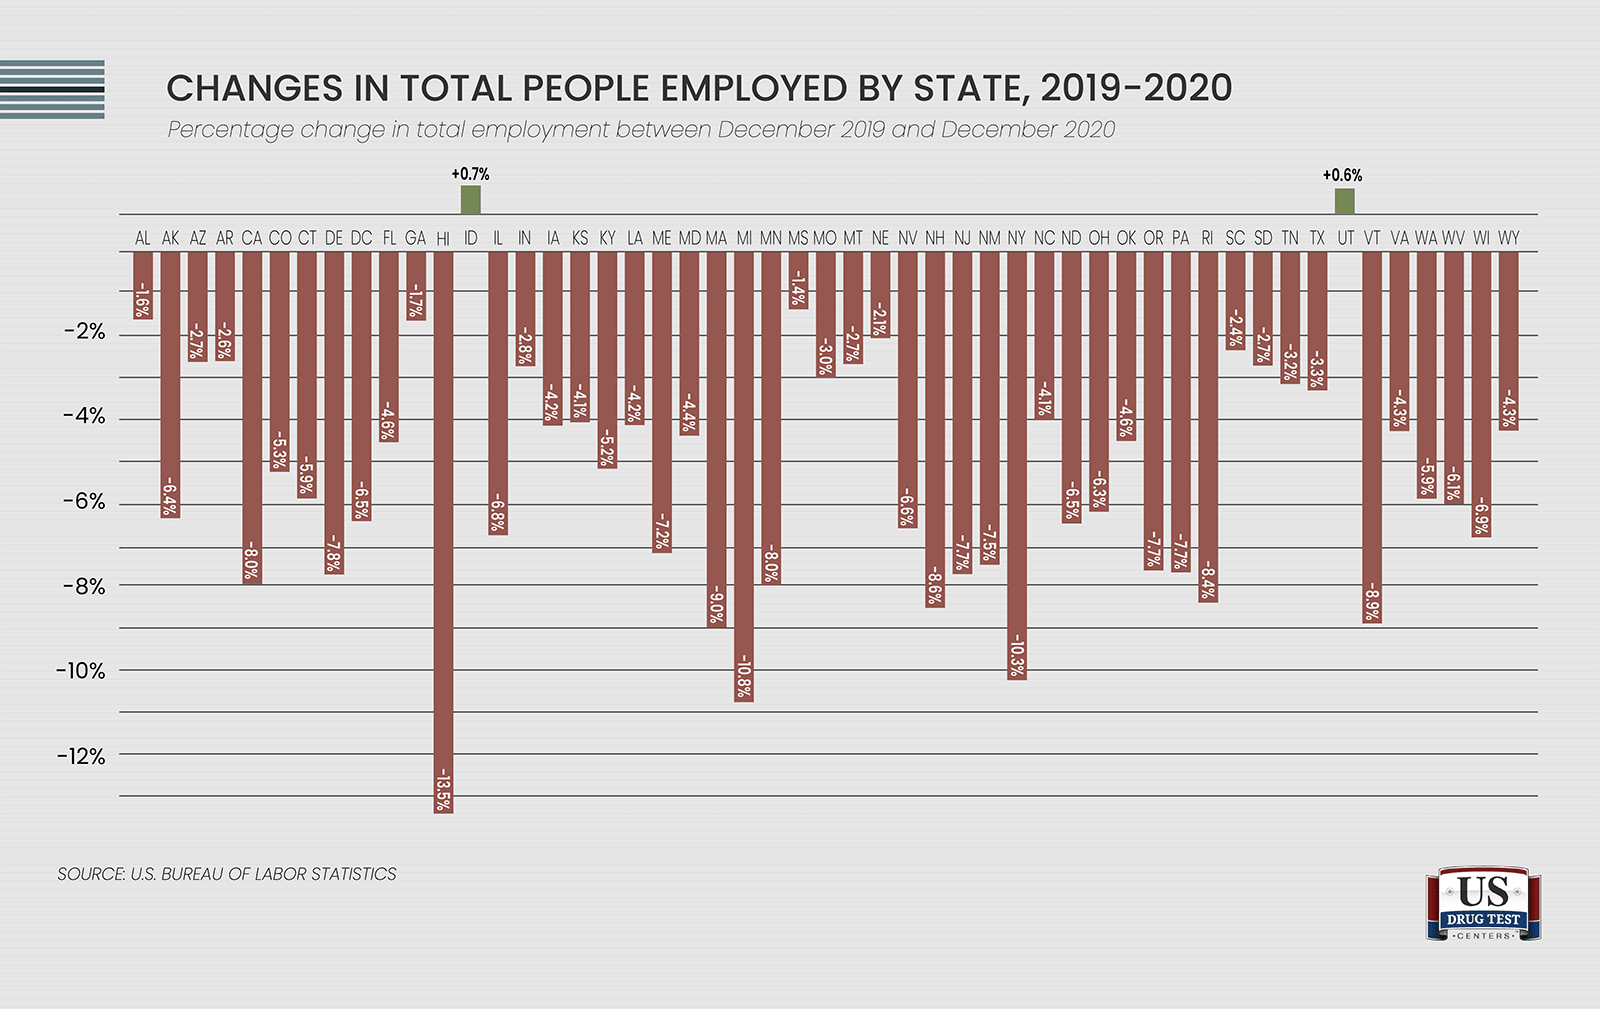 Changes in total people employed by state, 2019-2020